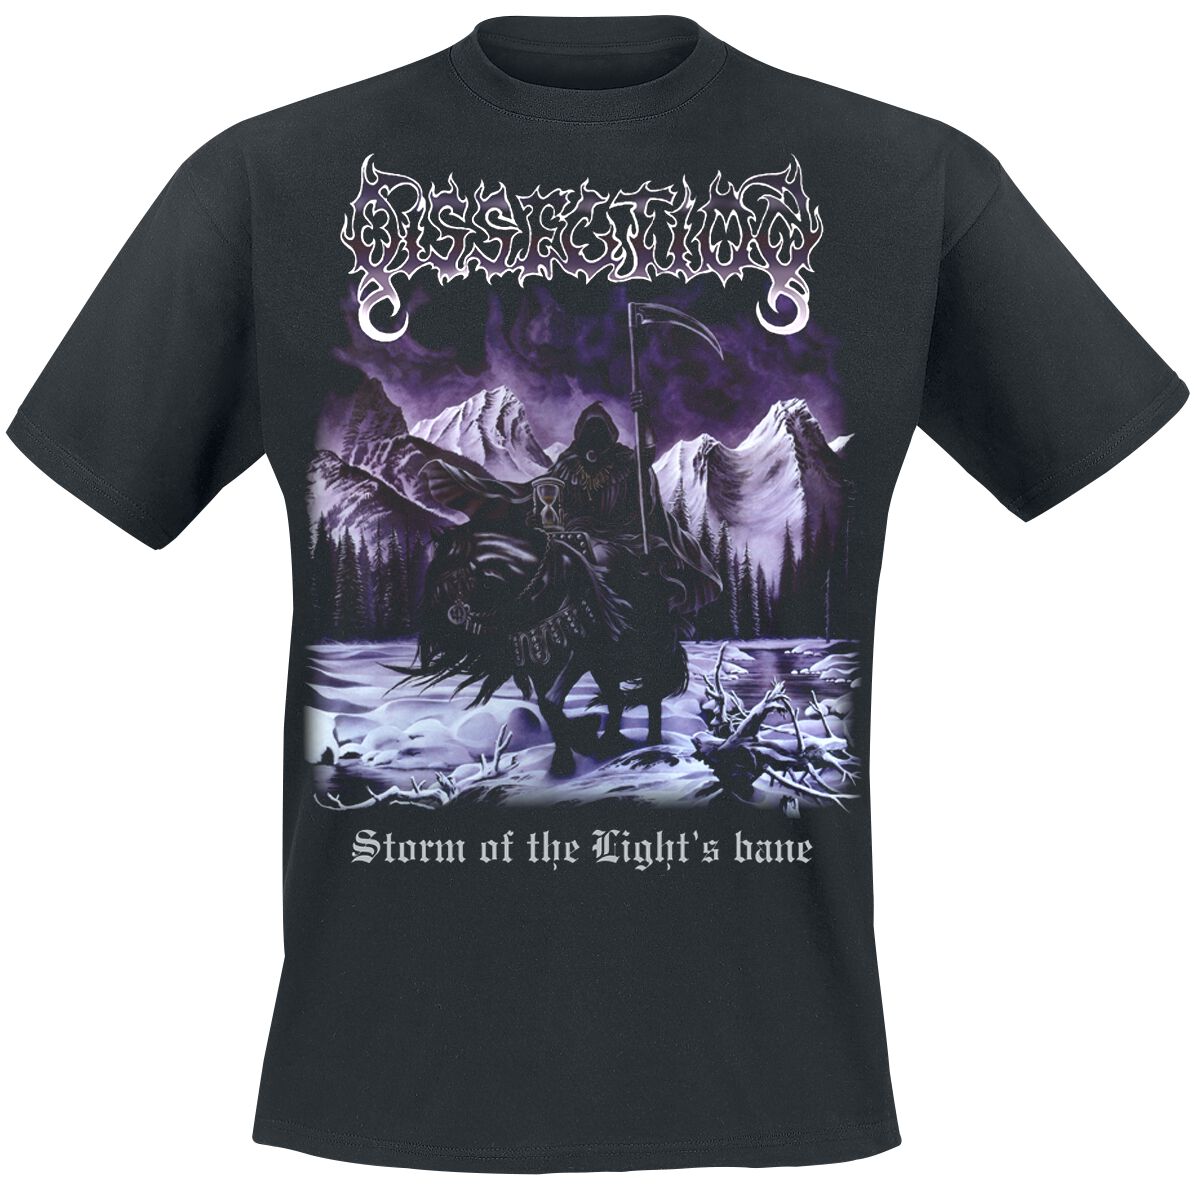 Dissection Storm of the light's bane T-Shirt schwarz in L von Dissection